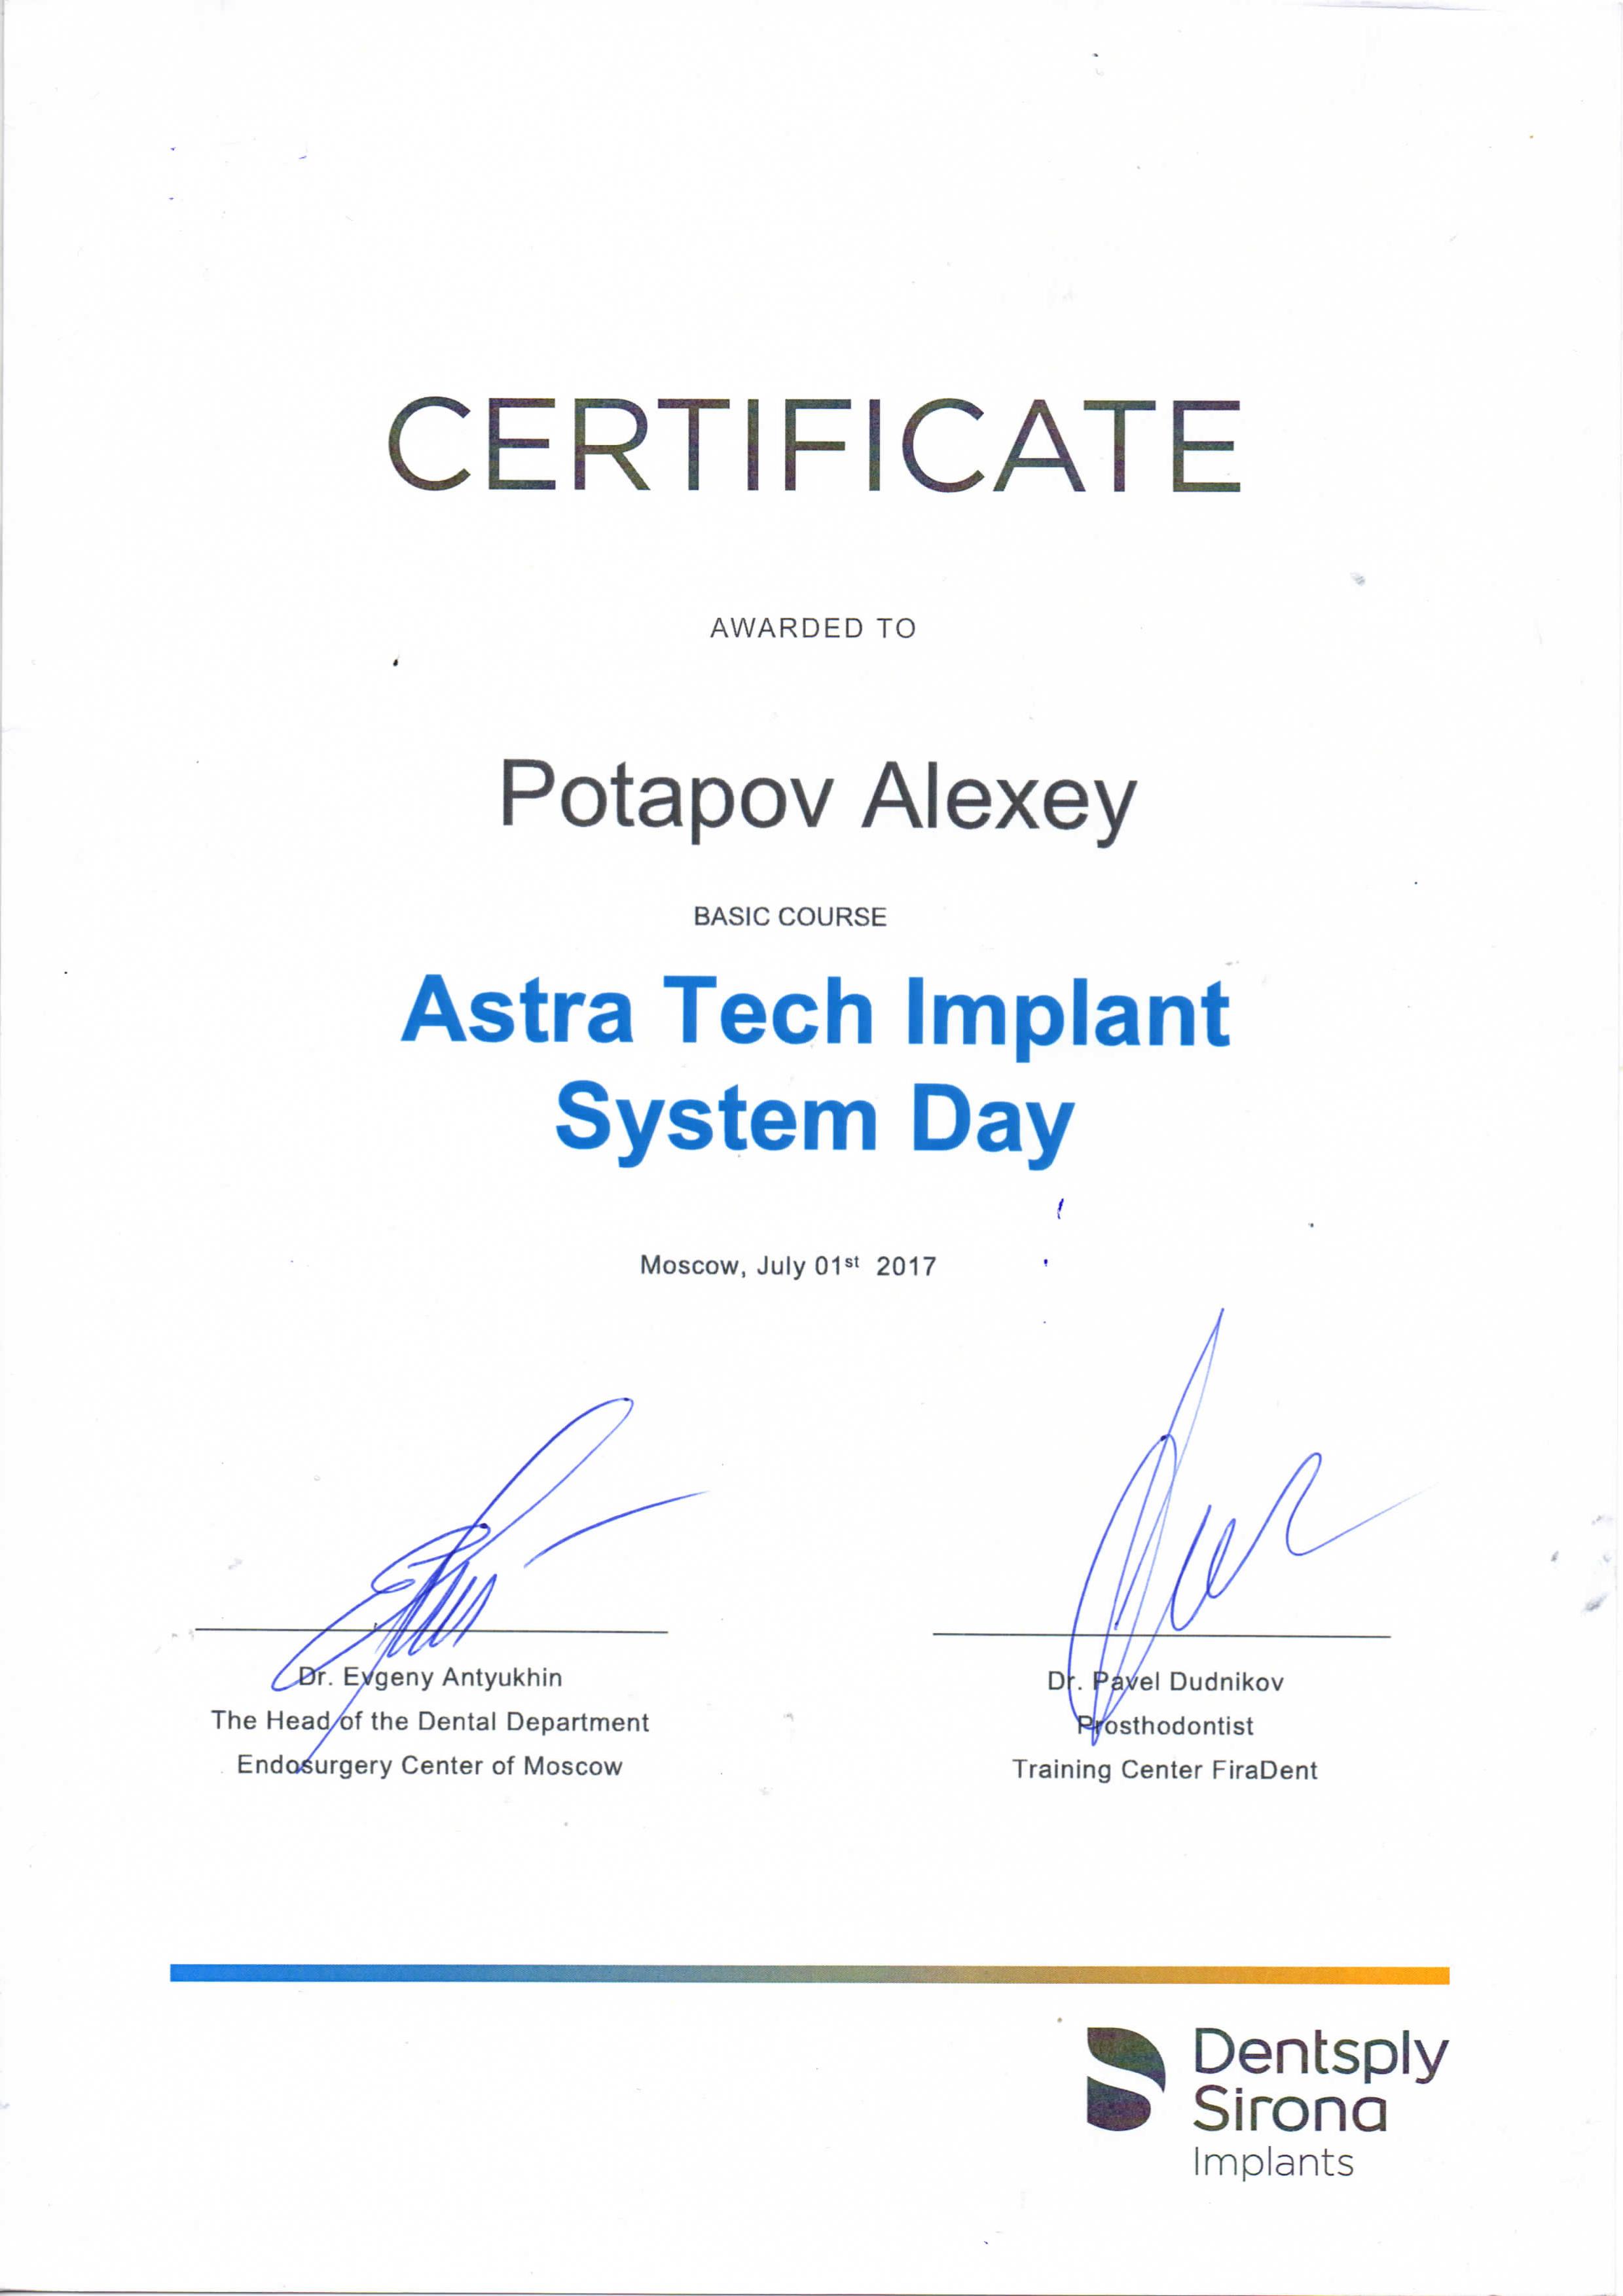 Astra Tech Implant